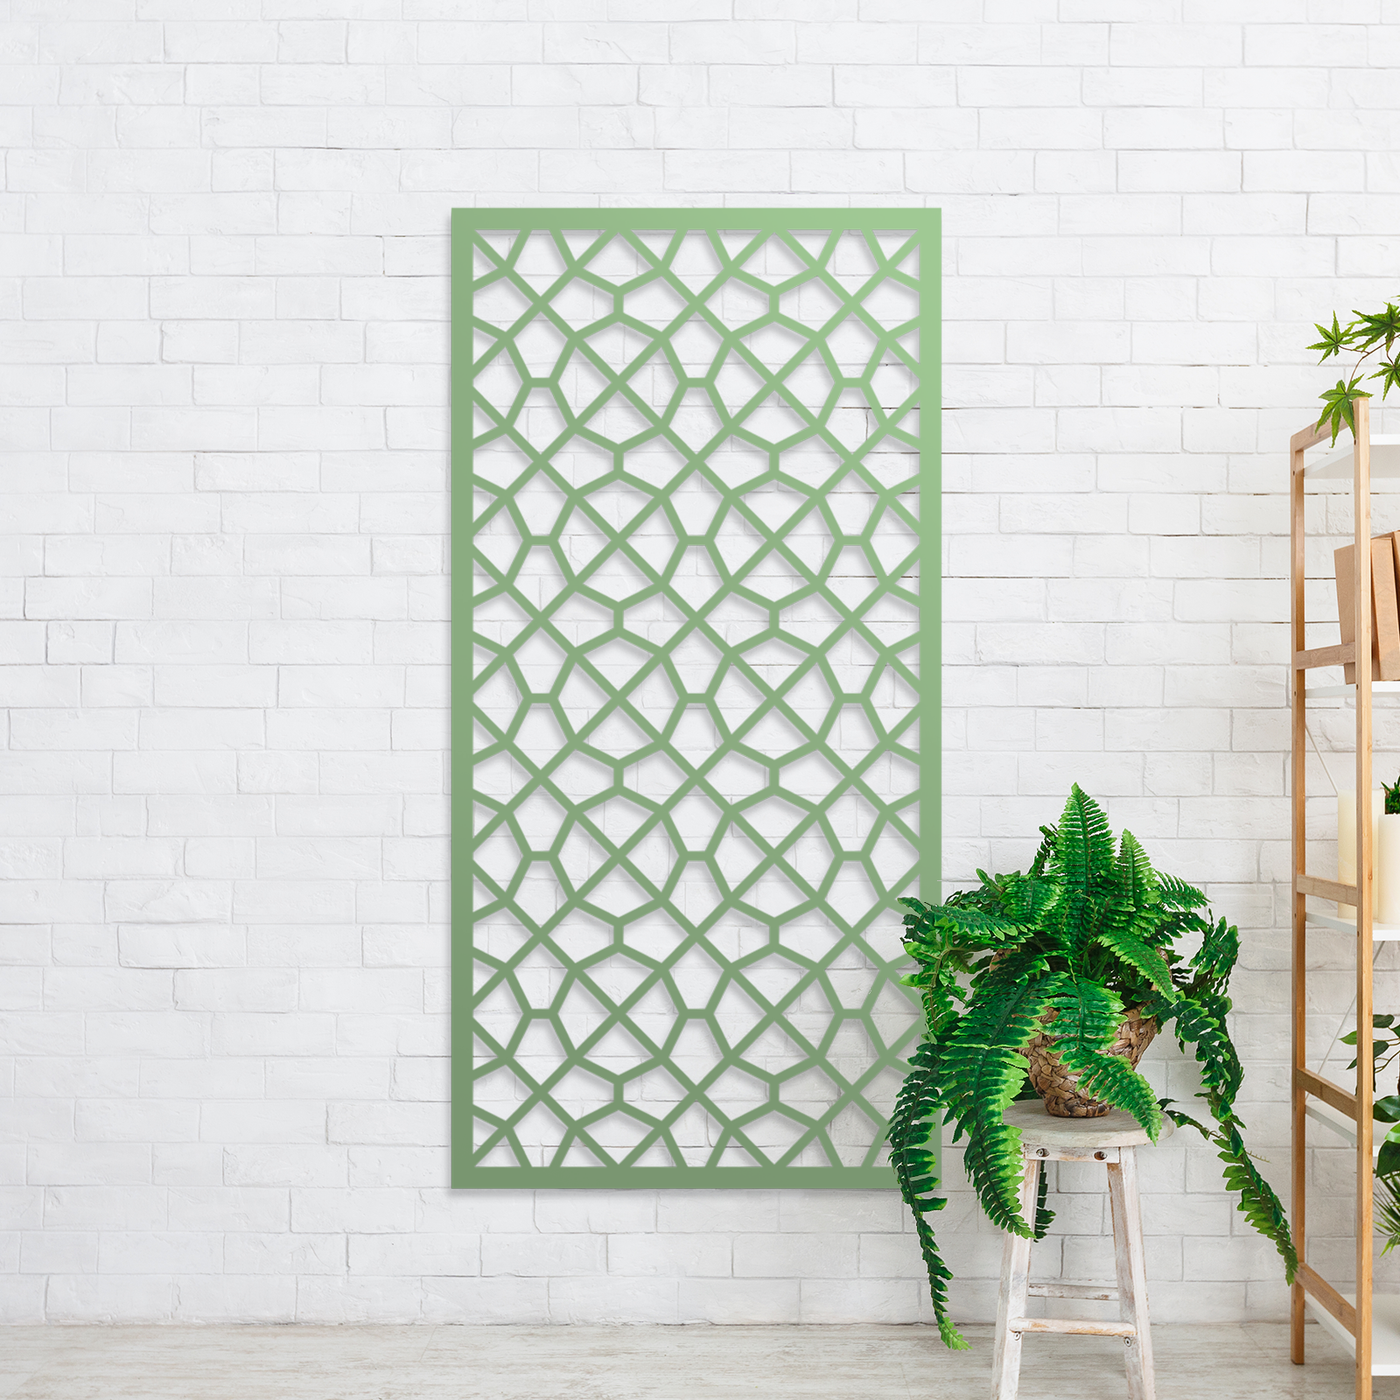 Stained Glass Metal Screen: The Perfect Way to Keep Your Garden Private and Stylish